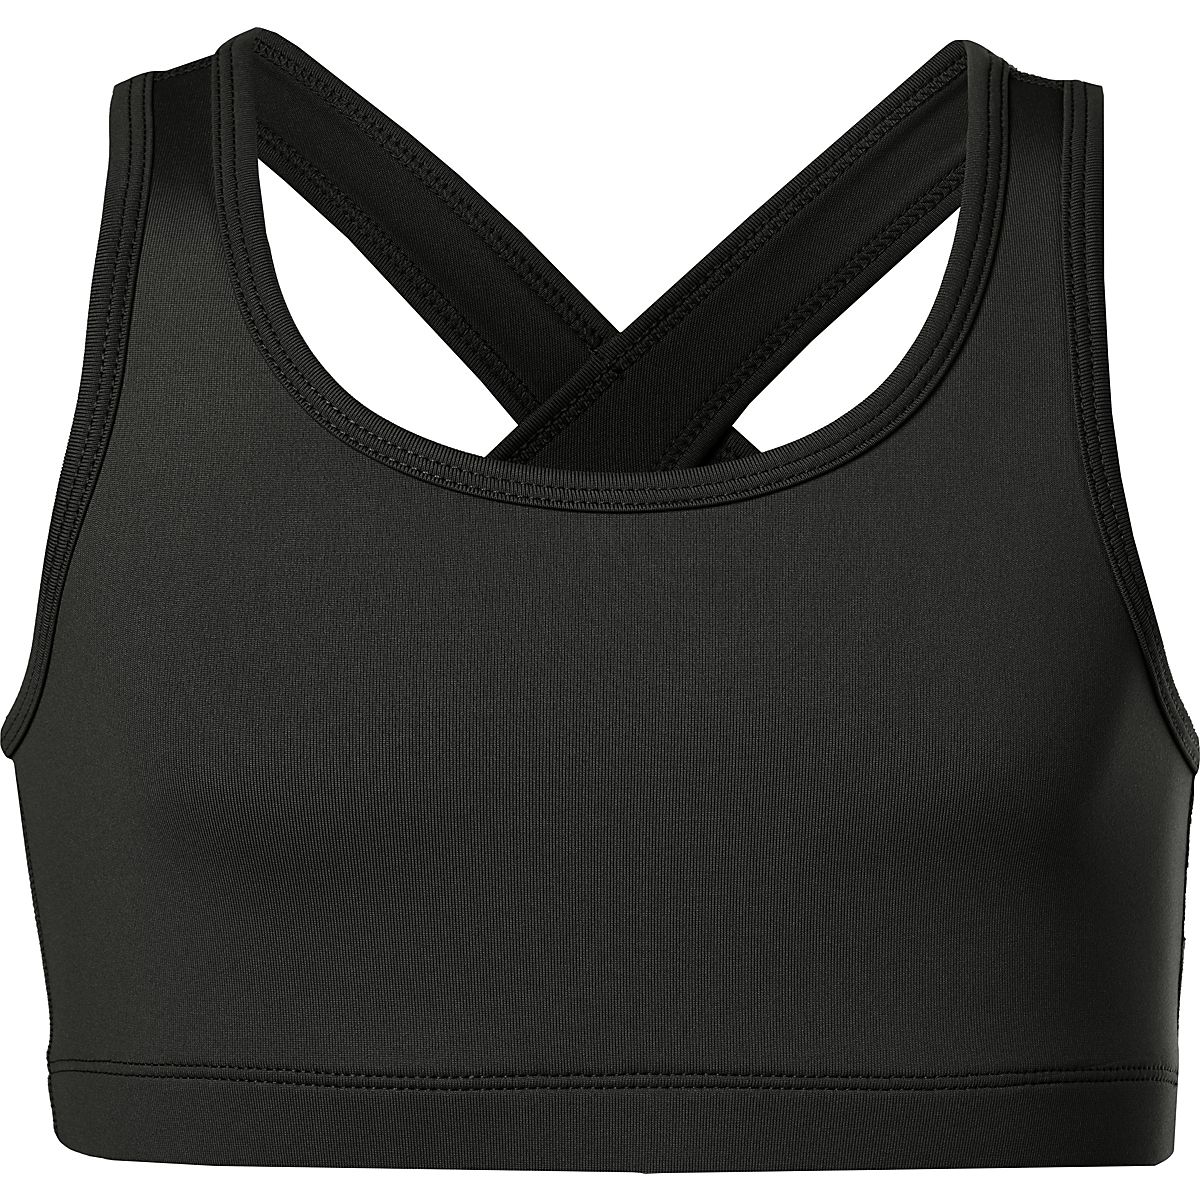 BCG Girls' Athletic Solid Light Support Sports Bra